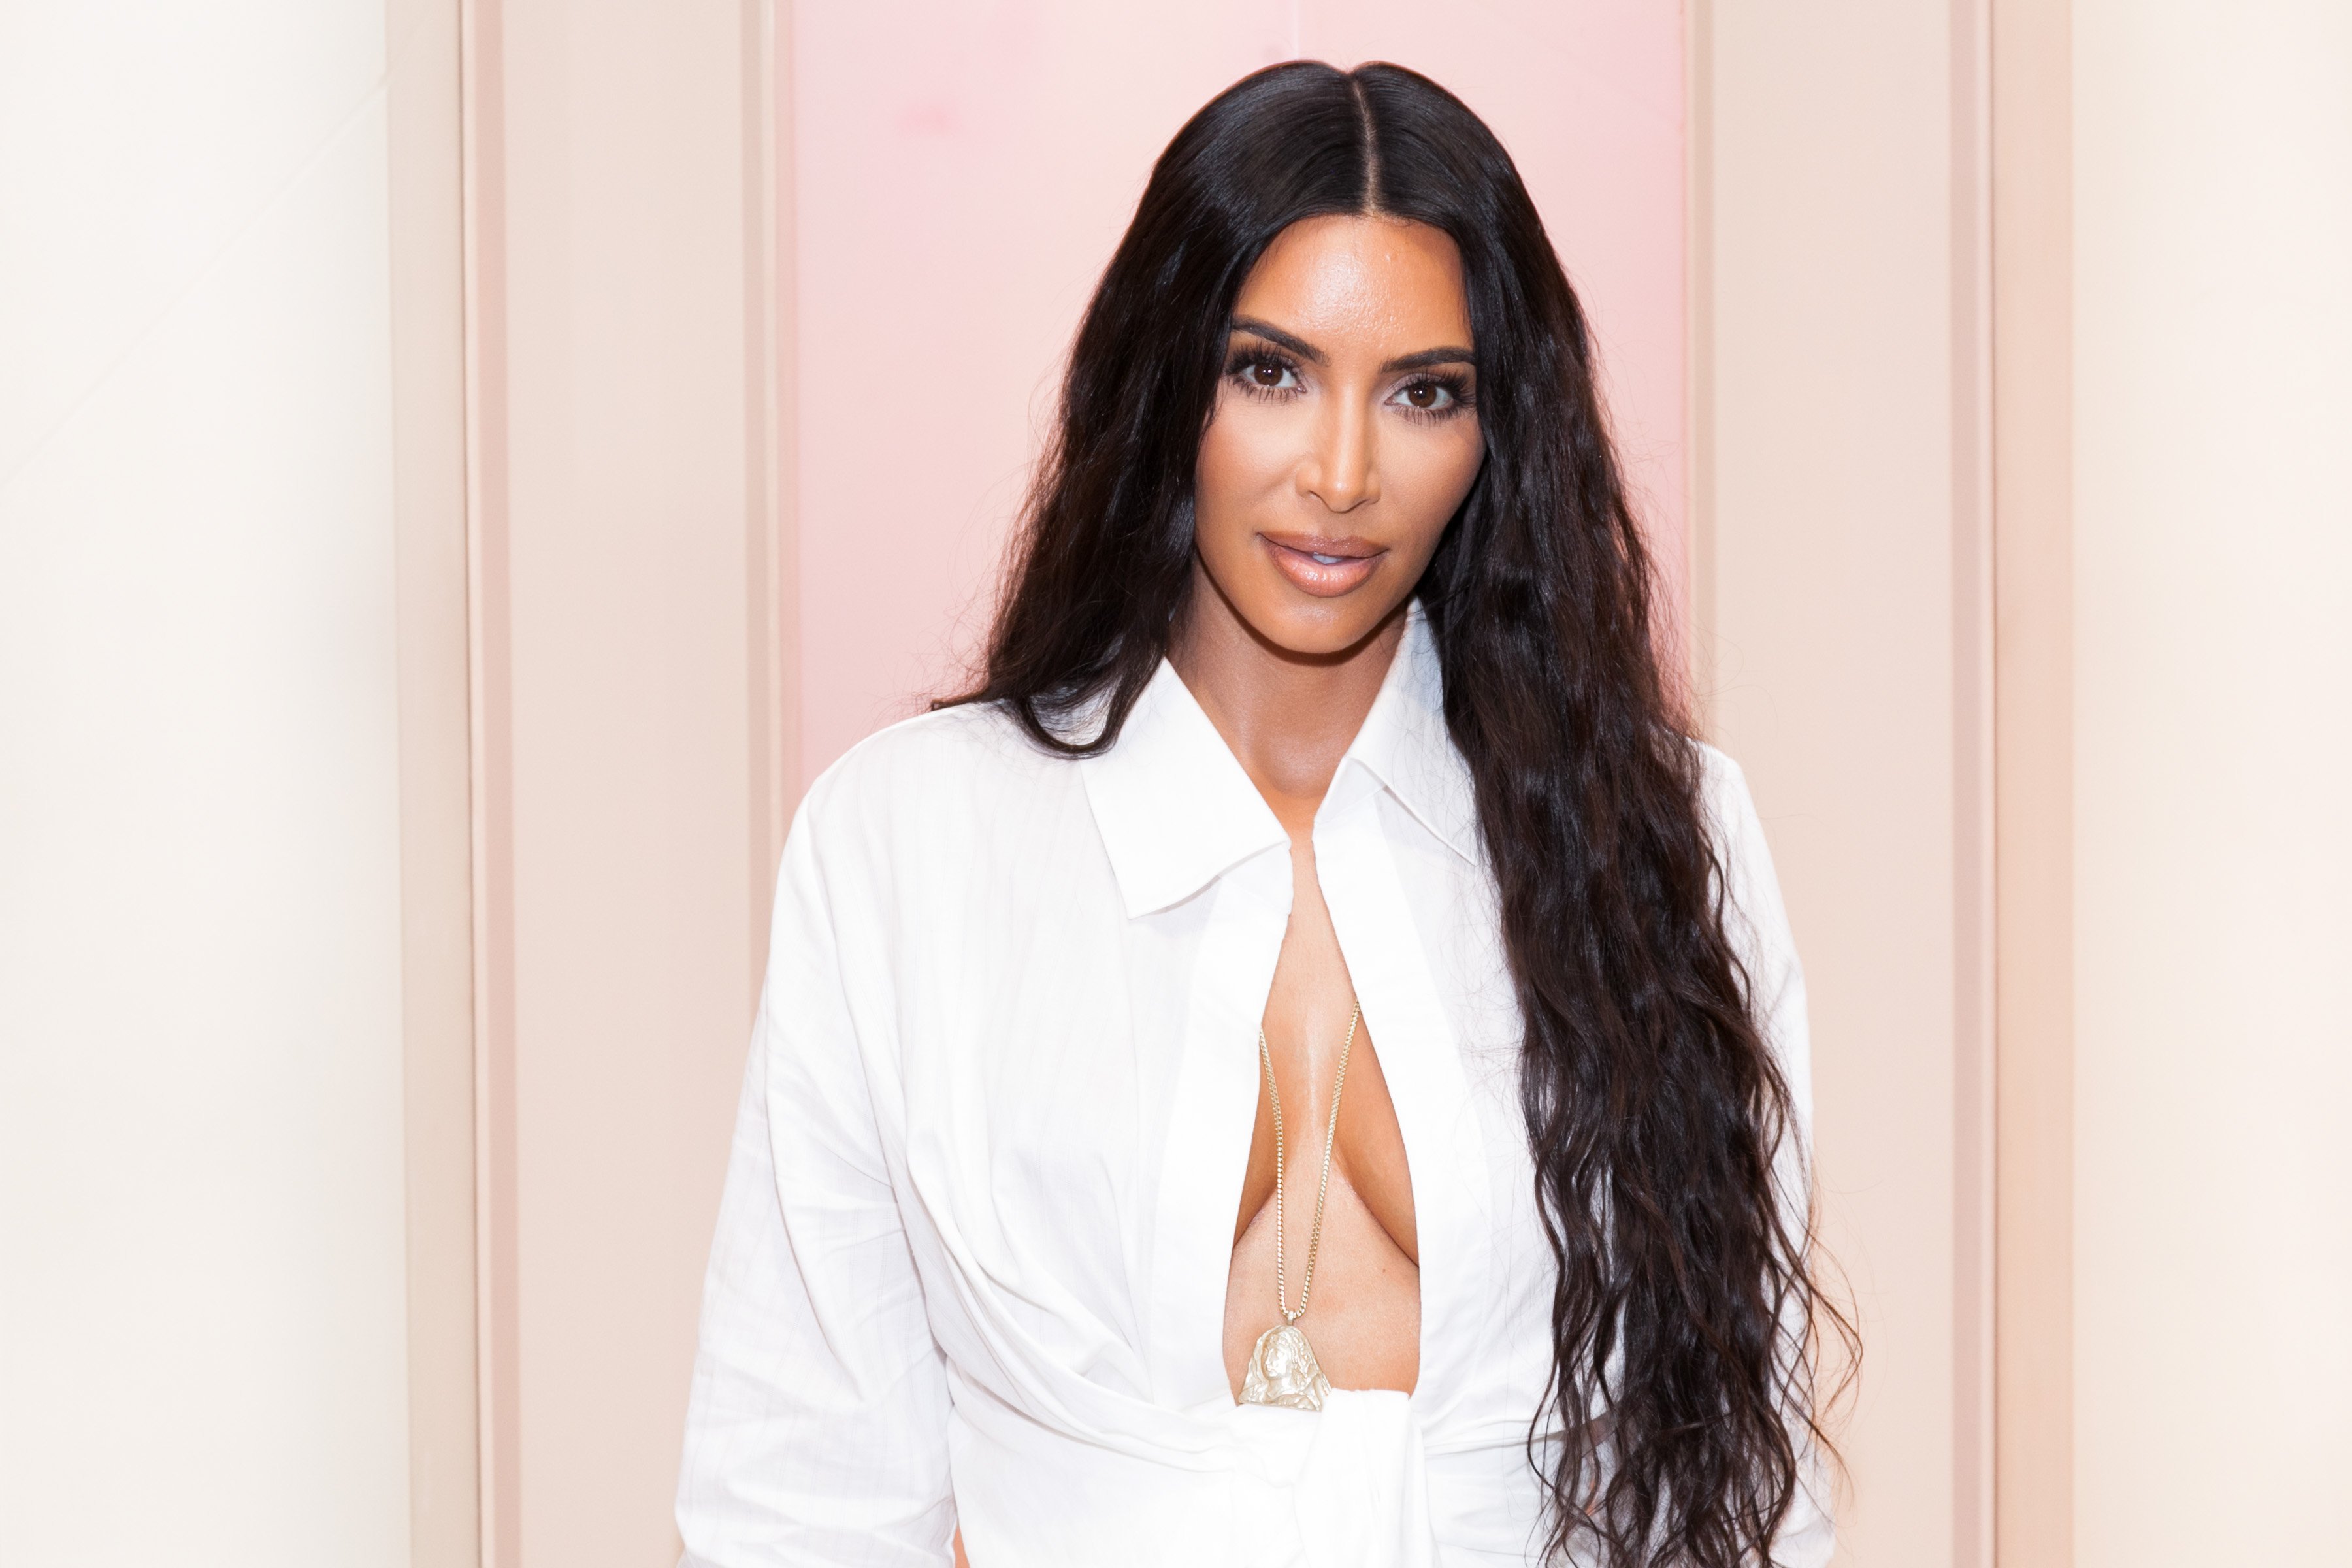  Kim Kardashian West at her KKW Beauty and Fragrance pop-up opening at Westfield Century City in Los Angeles on June 20th, 2018 | Source: Getty Images